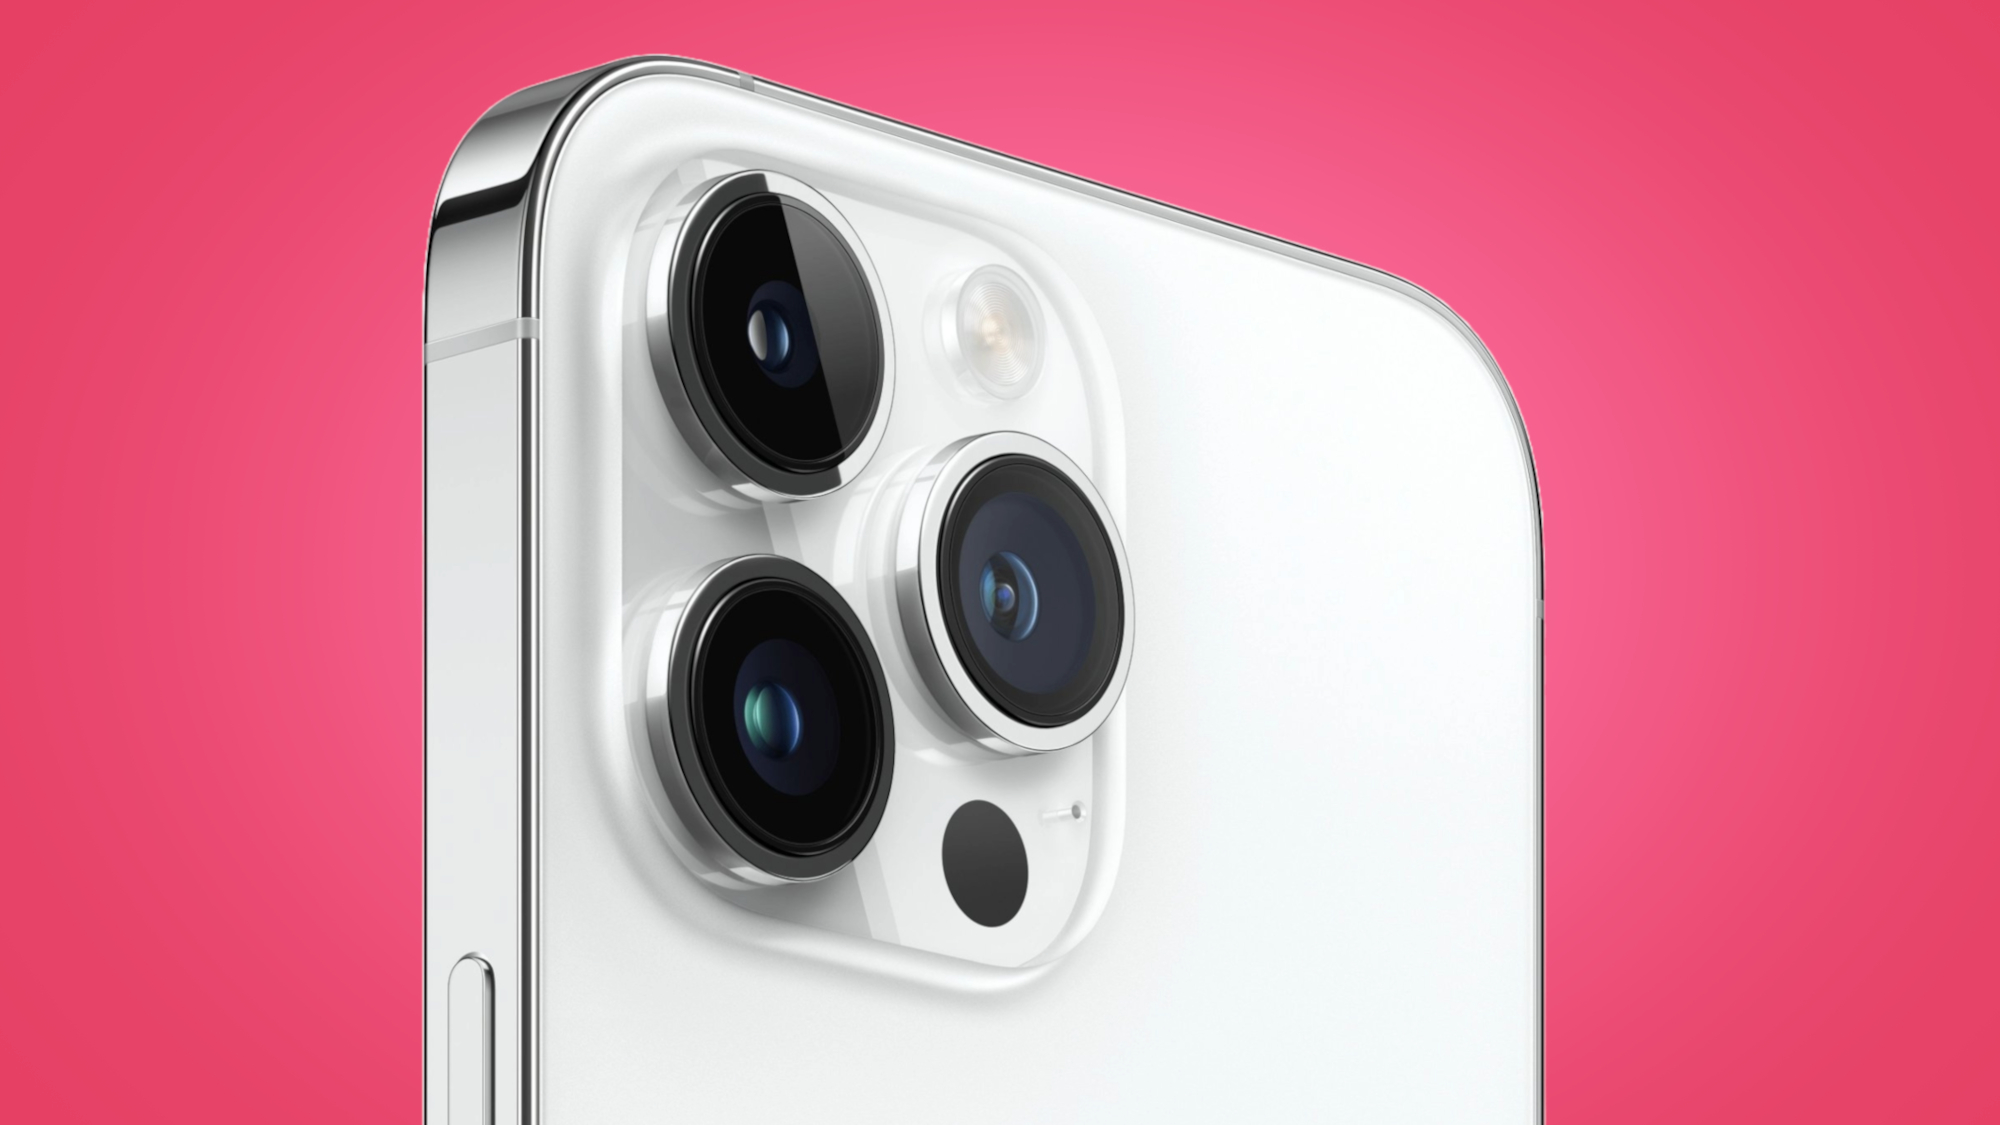 This neat iPhone camera trick will let you take pictures using nothing but your voice